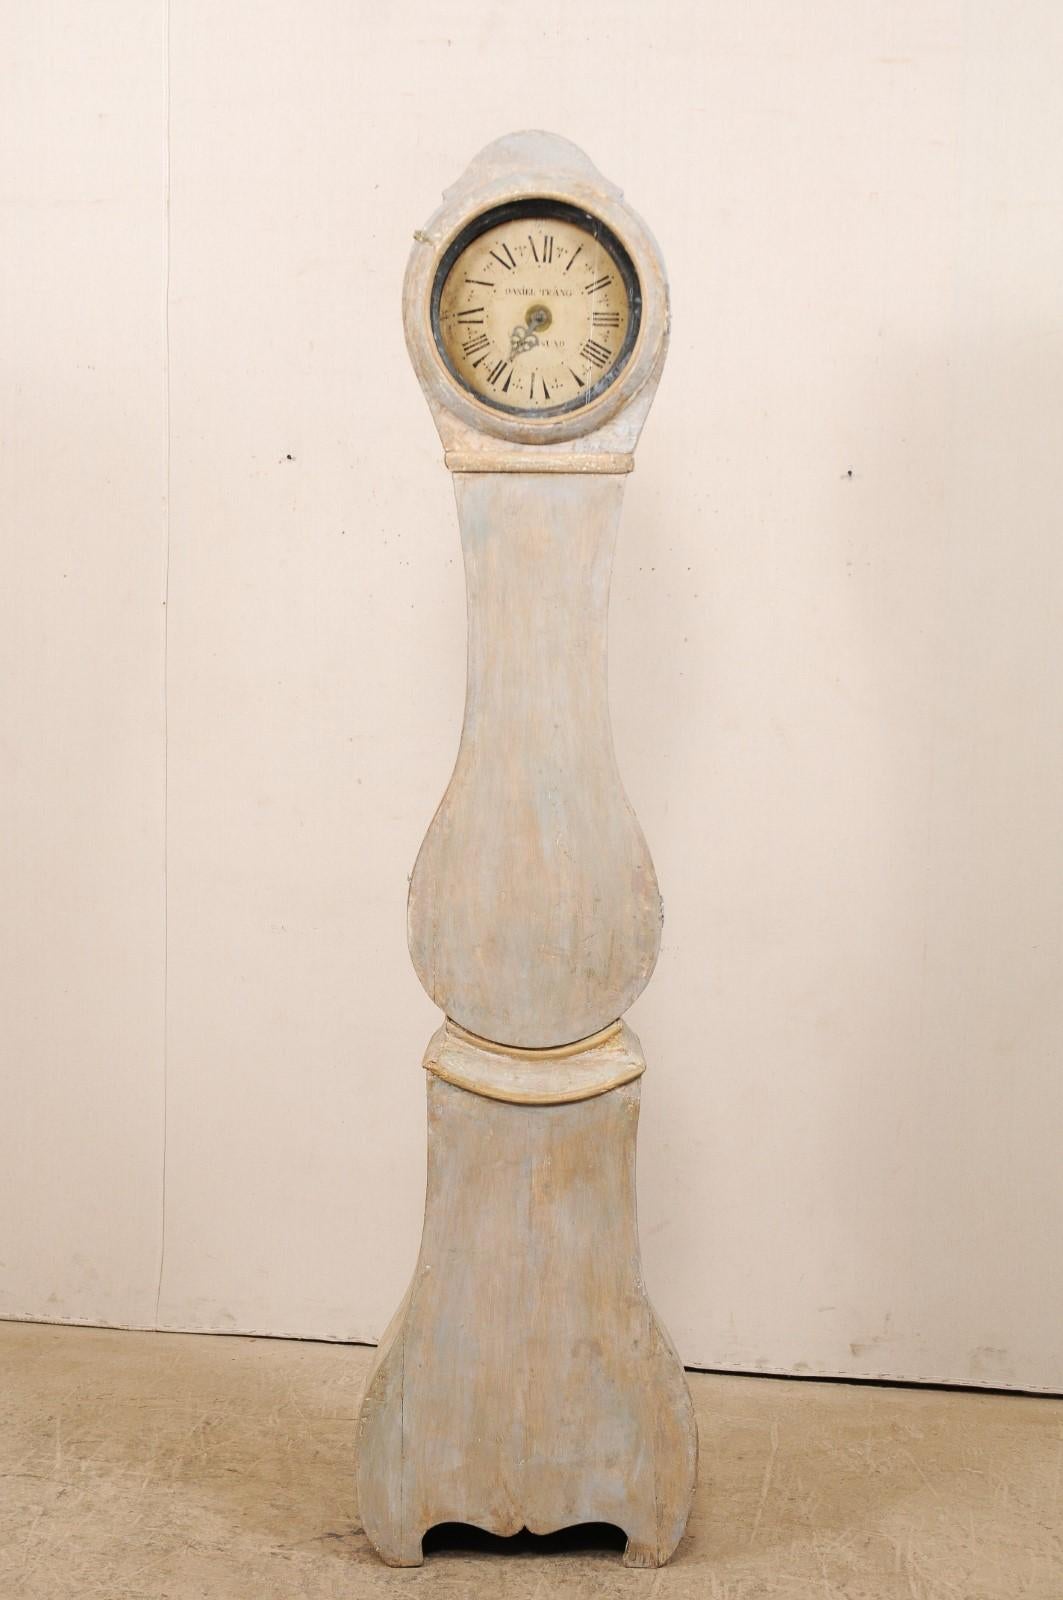 A 19th century Swedish floor clock. This antique clock from Sweden is simple and unassuming with it's round-shaped head, minimally adorn with a curved top crest, an elongated neck moves down onto the tear drop shaped belly, uplifting trim molding